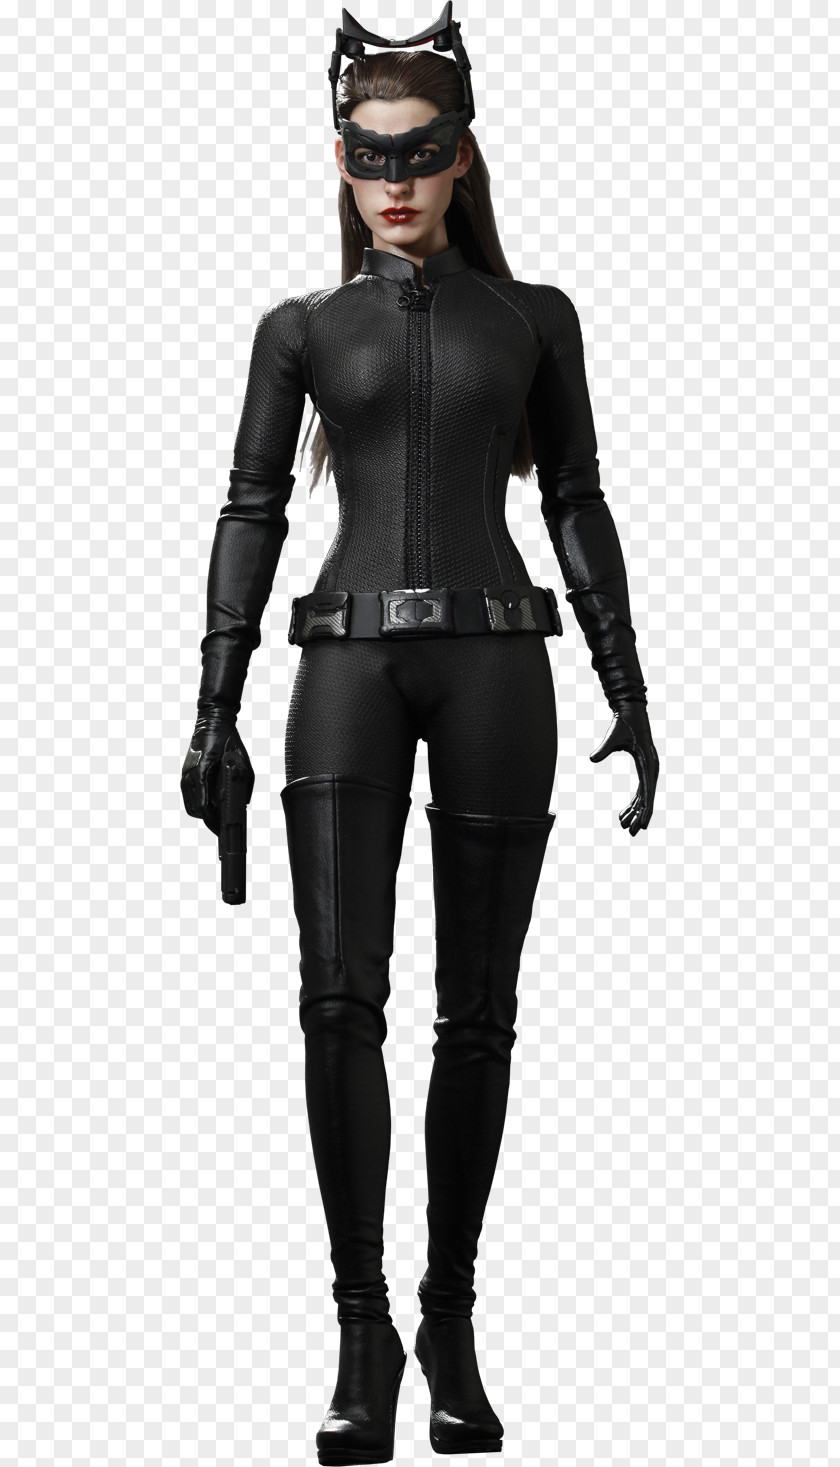 Catwoman Costume Anne Hathaway The Dark Knight Rises Batman PNG